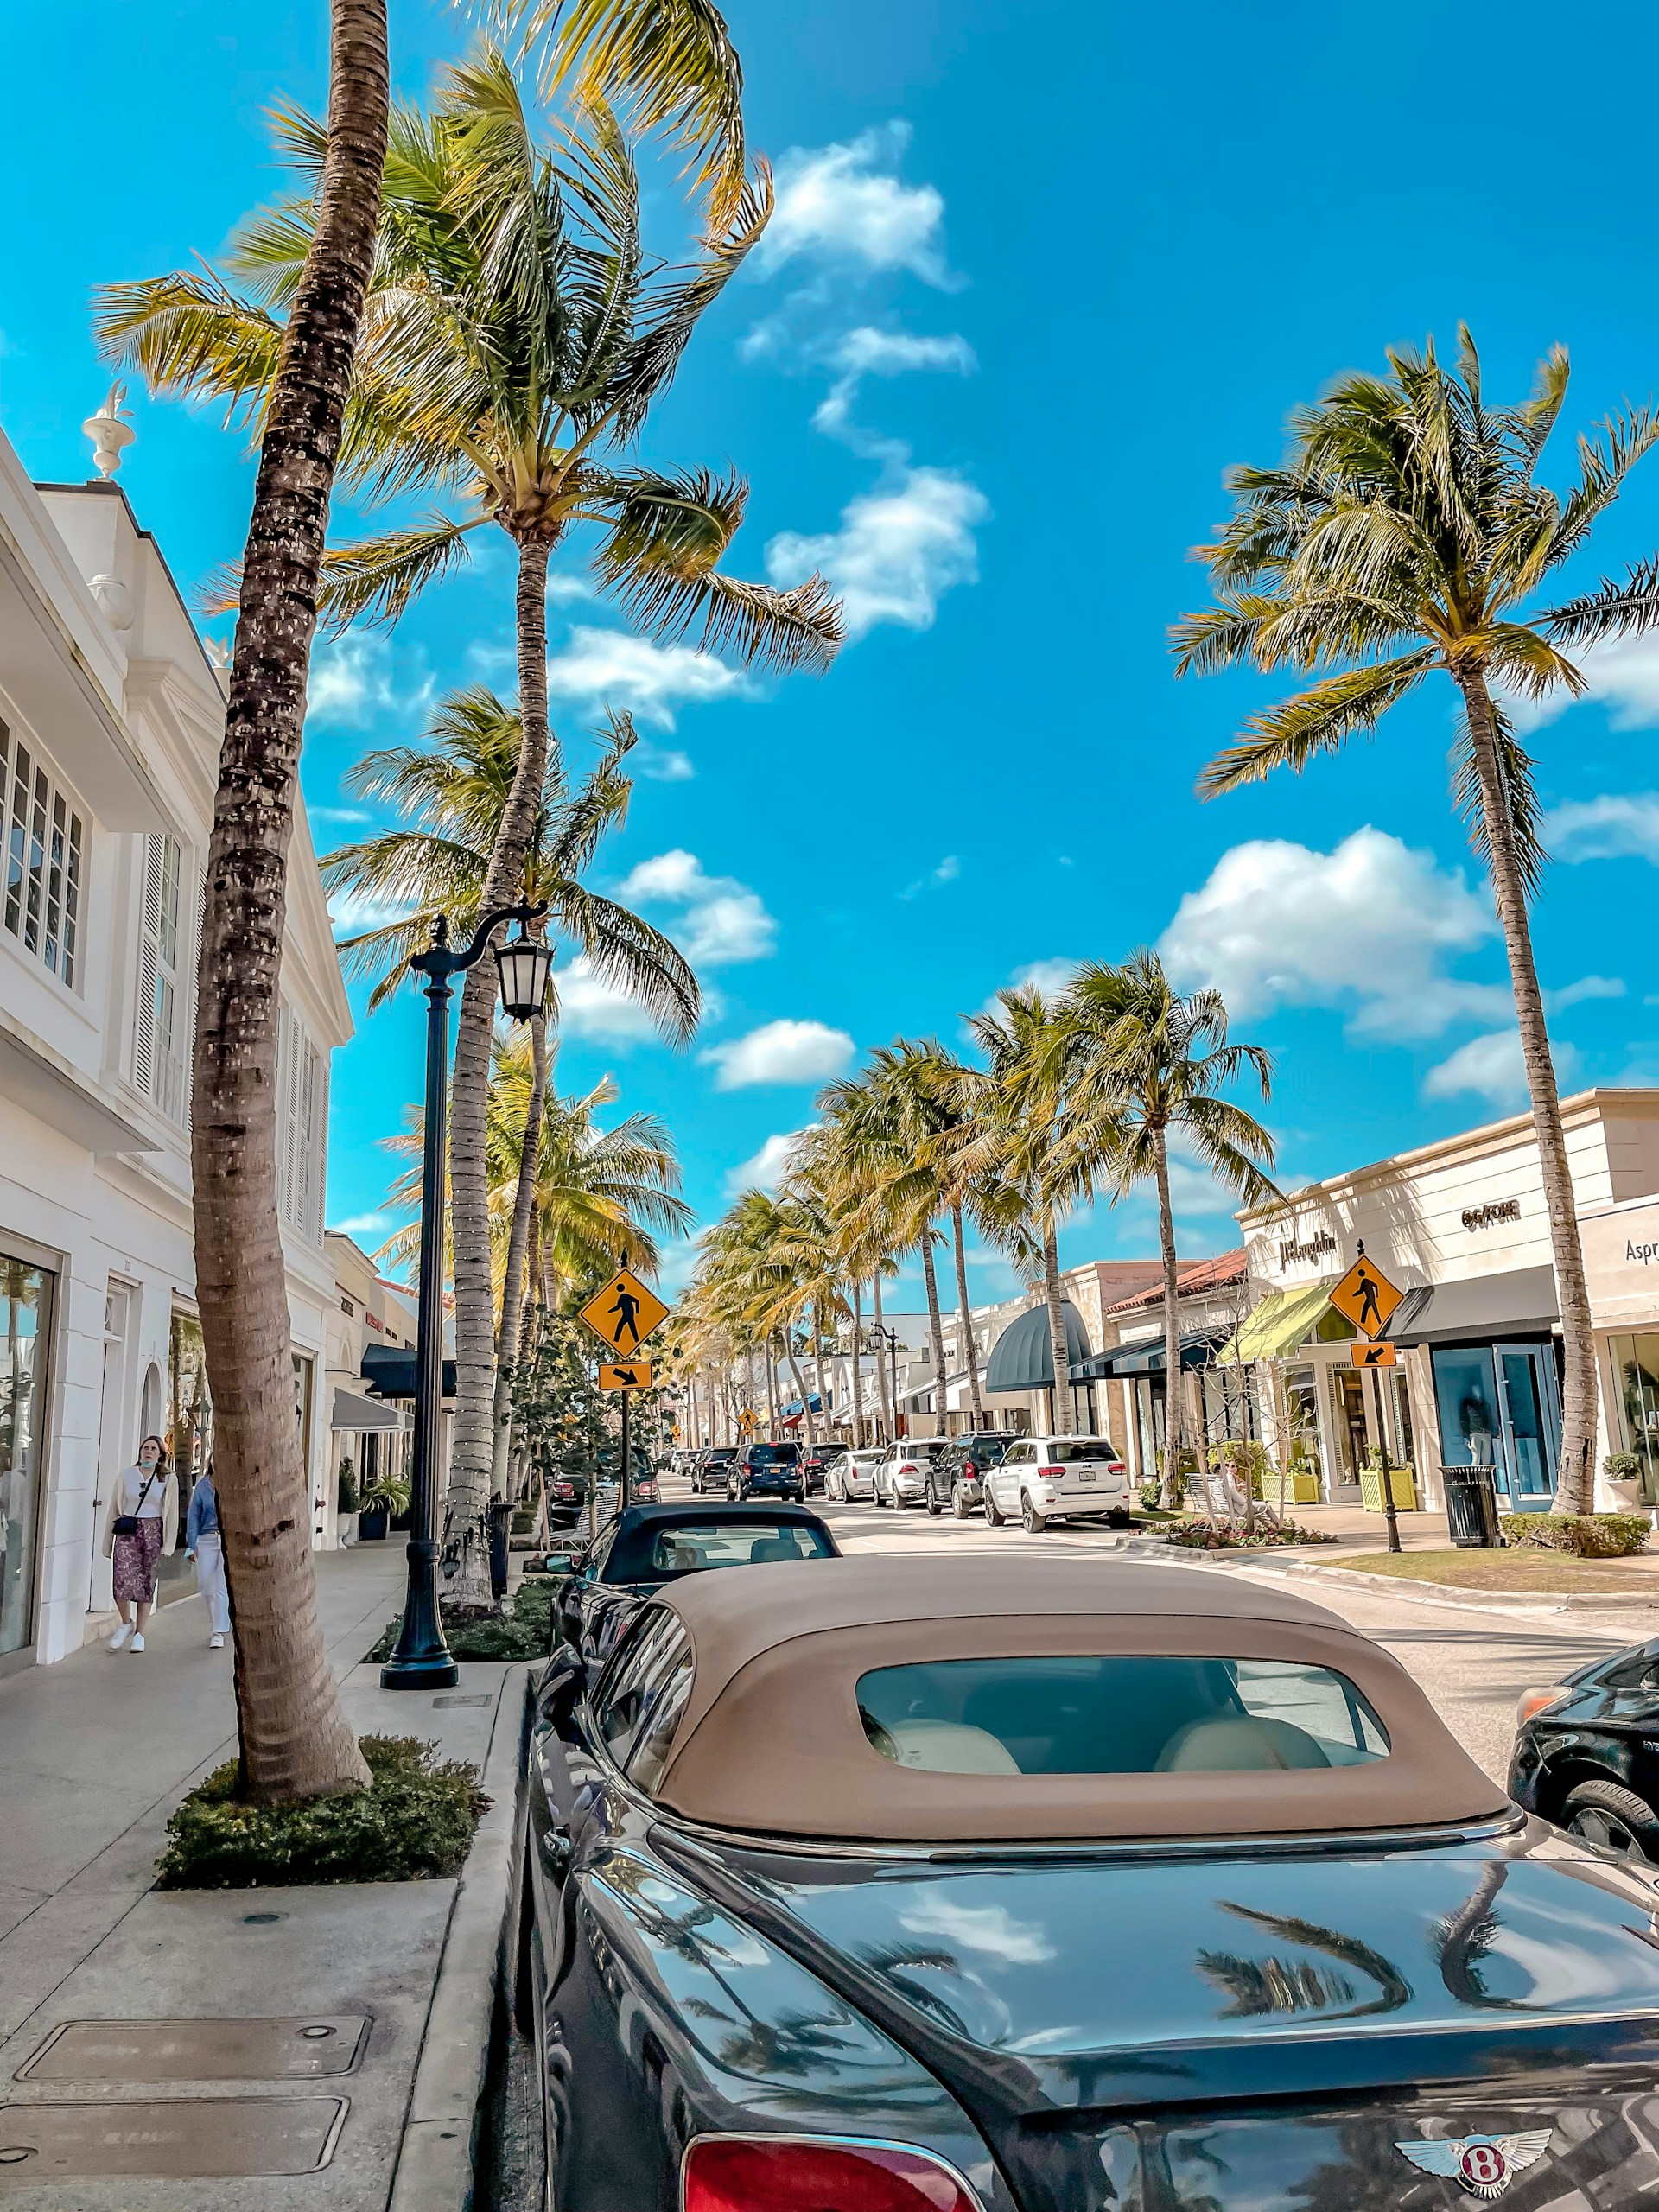 cars filling the streets of worth avenue in Palm beach, Florida. Lots of beautiful palm trees